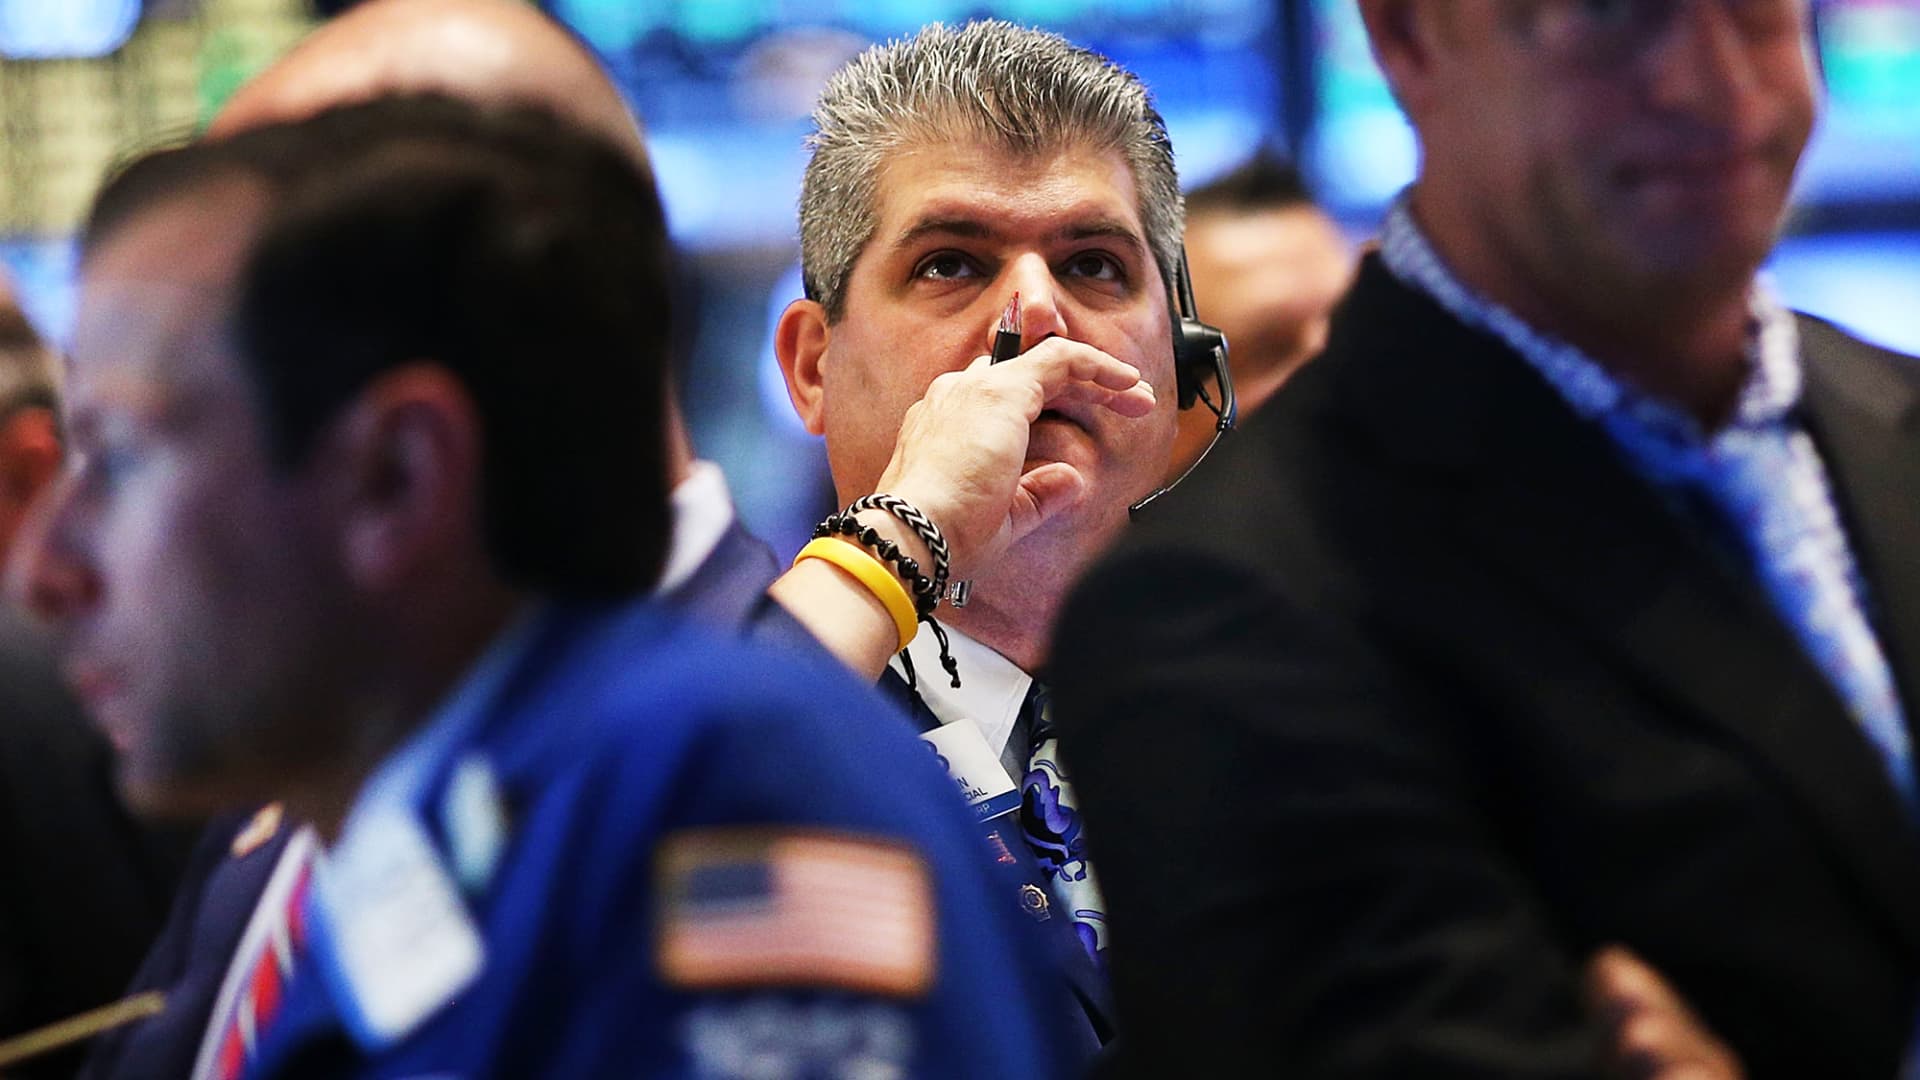 Stock futures are lower as market exits rollercoaster week